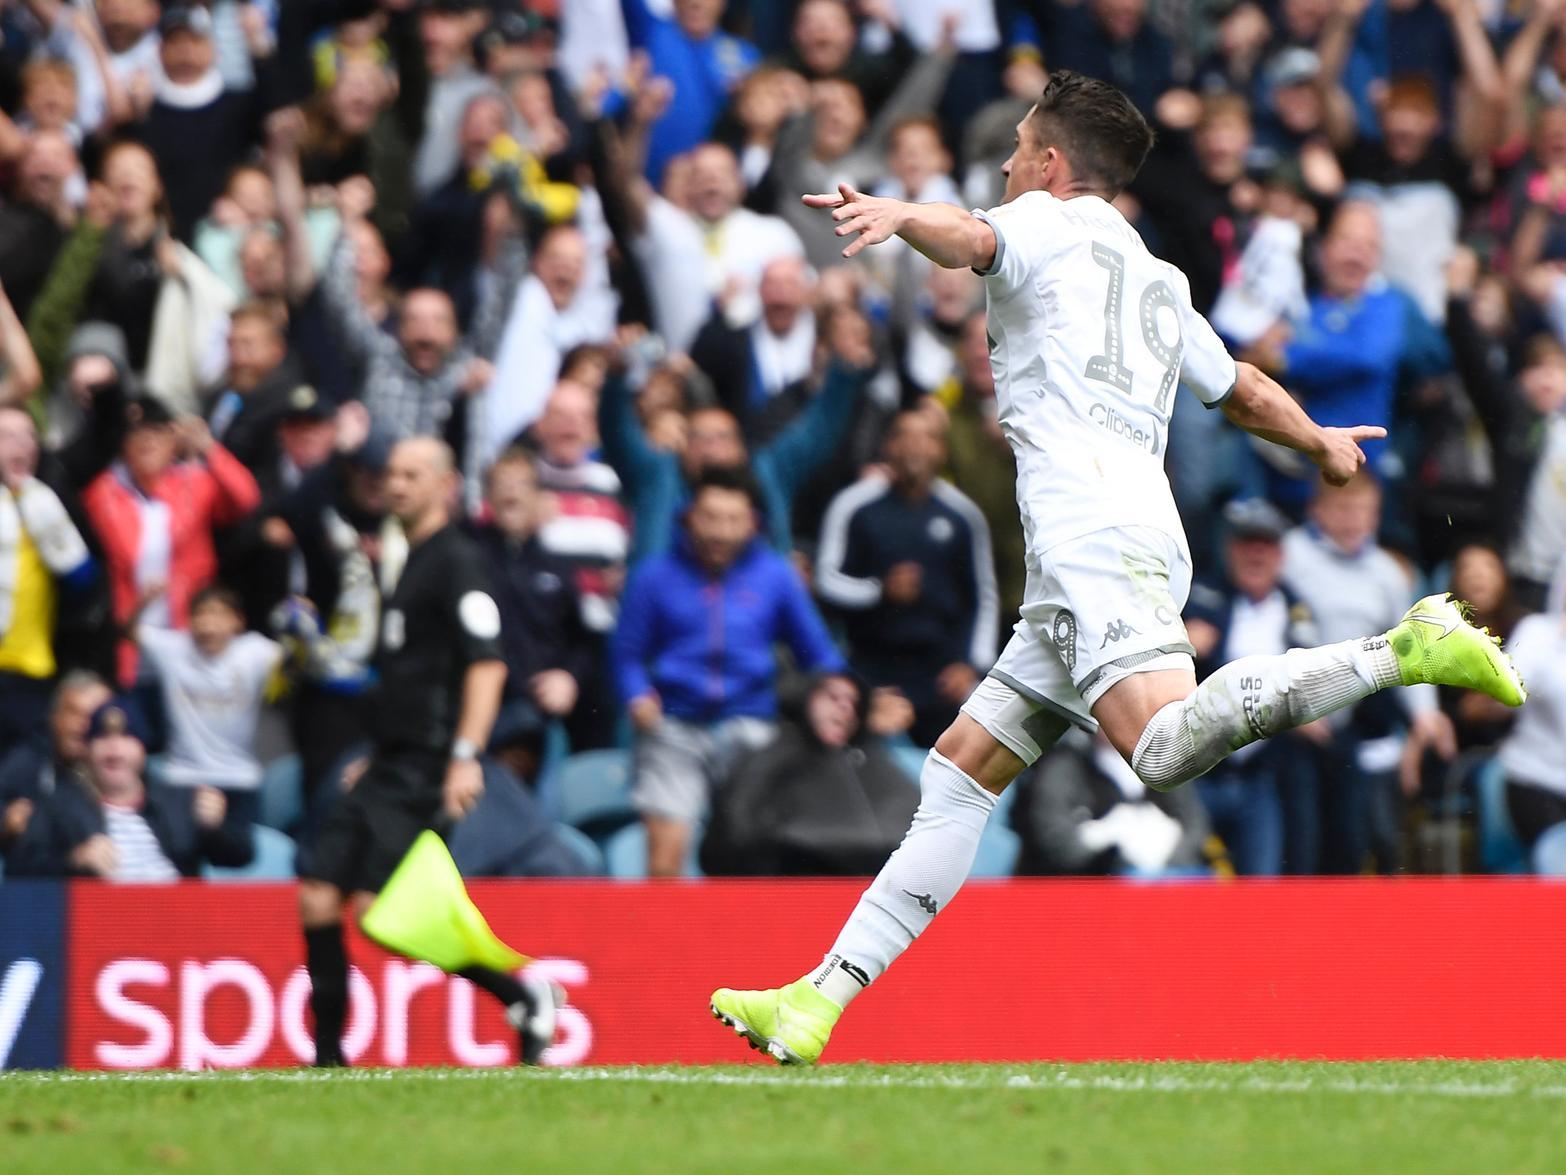 Although more of a creator, Hernandez certainly has an eye for goal. The Spaniard has now scored more league goals for Leeds United (24) than at any other club.  No wonder he wants to stay!